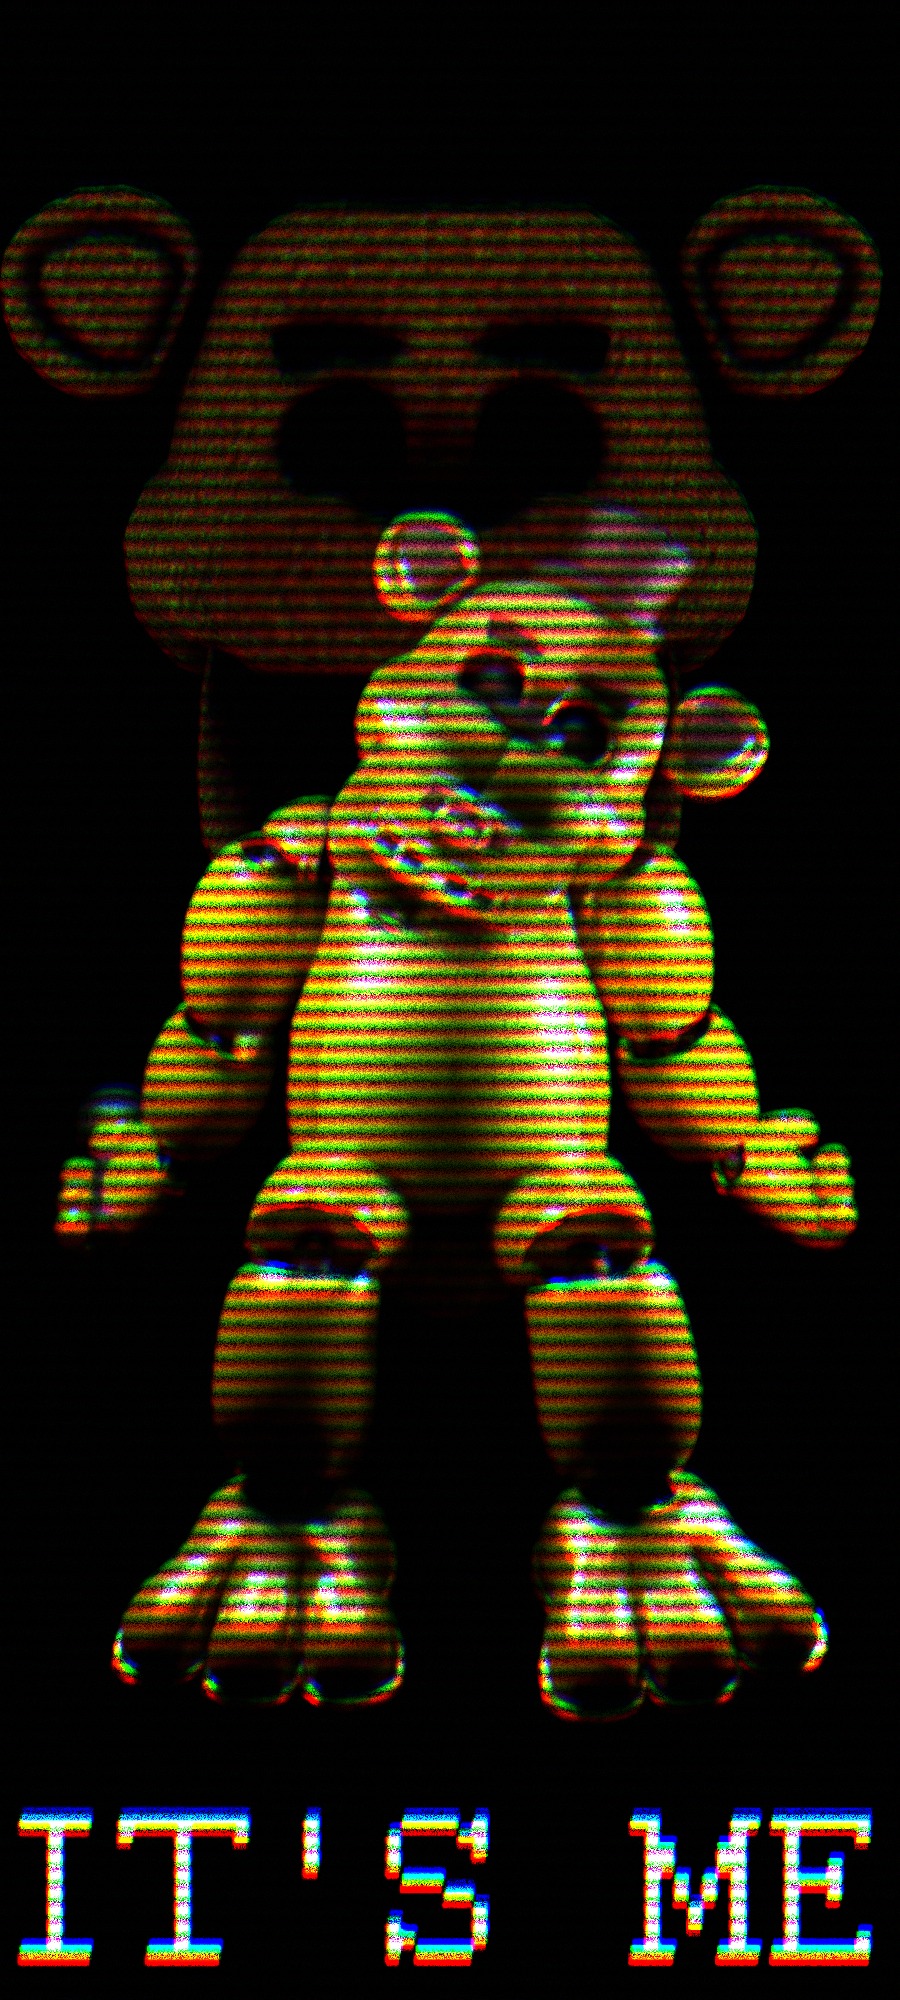 Golden Freddy Image Wallpapers